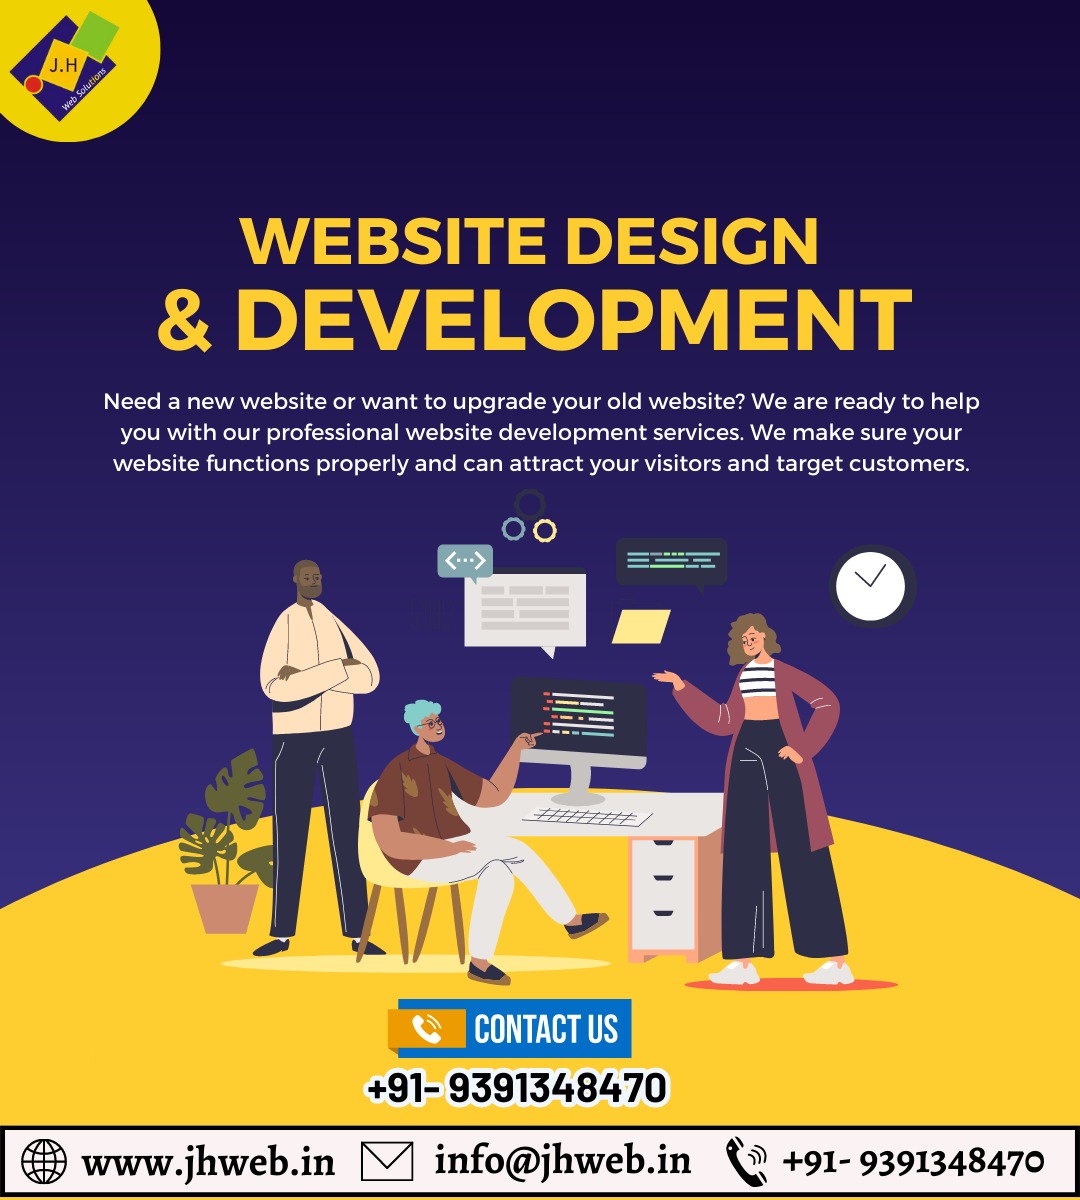 what are the point need to consider website designer for business growth